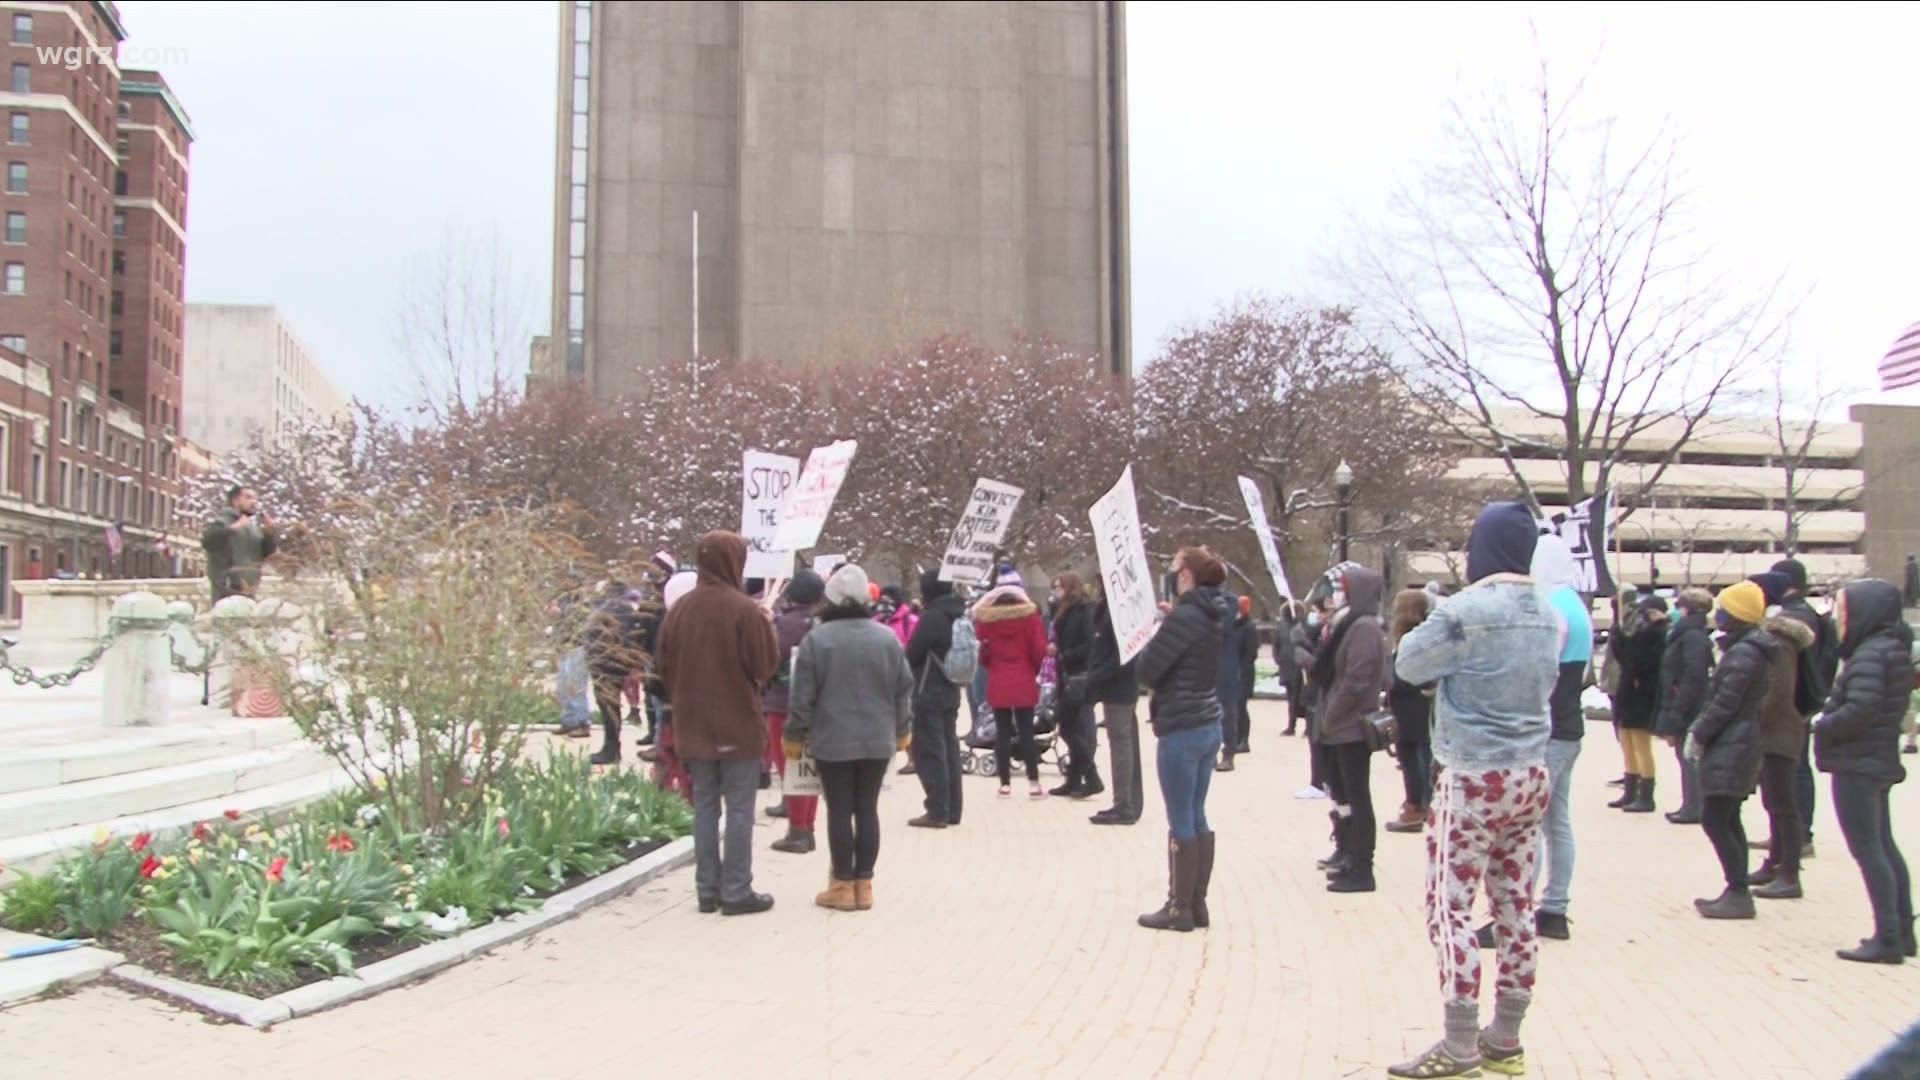 Demonstrators got together in Niagara Square Wednesday evening to hold a peaceful rally one day after the conviction of Derek Chauvin.